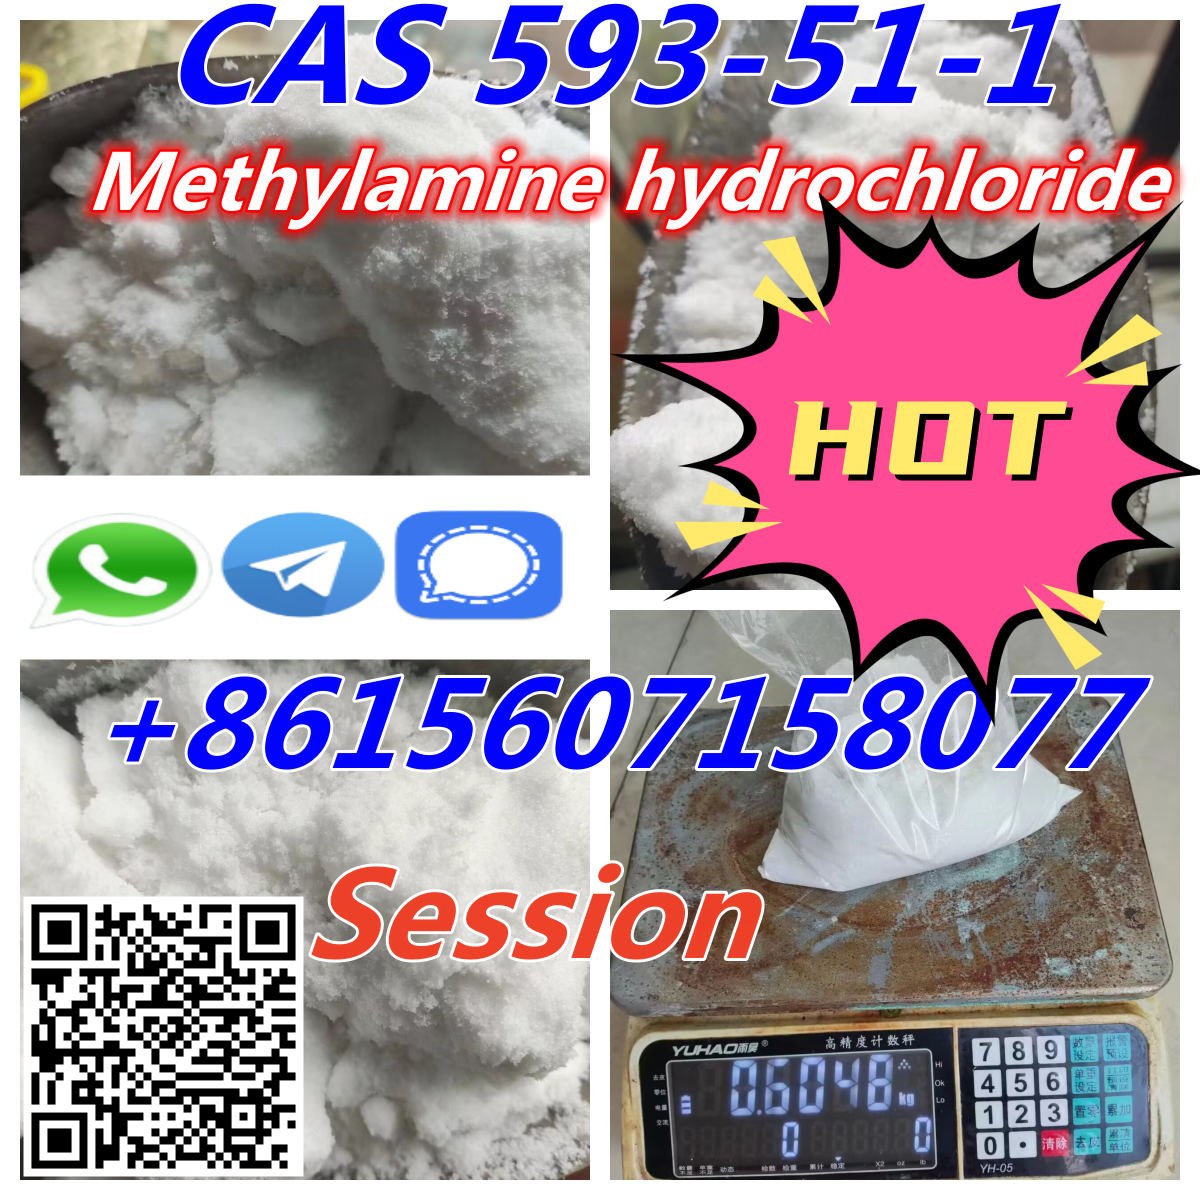 Hot Selling 99% purity CAS 593-51-1 Methylamine hydrochloride in Warehouse-pic_1